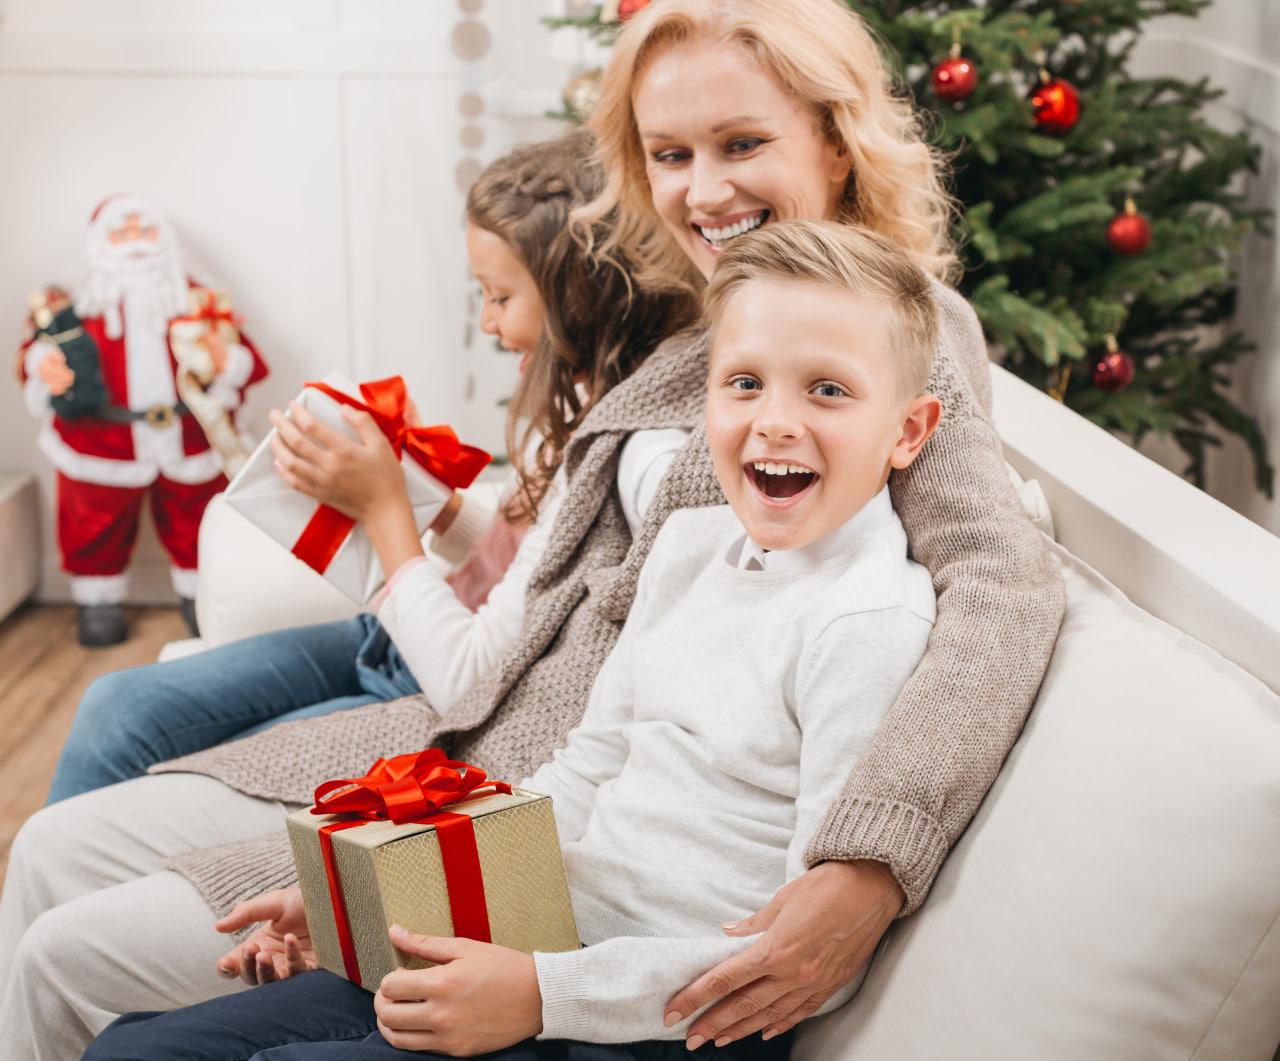 beautiful blonde woman hugging children holding gifts and presents on new year